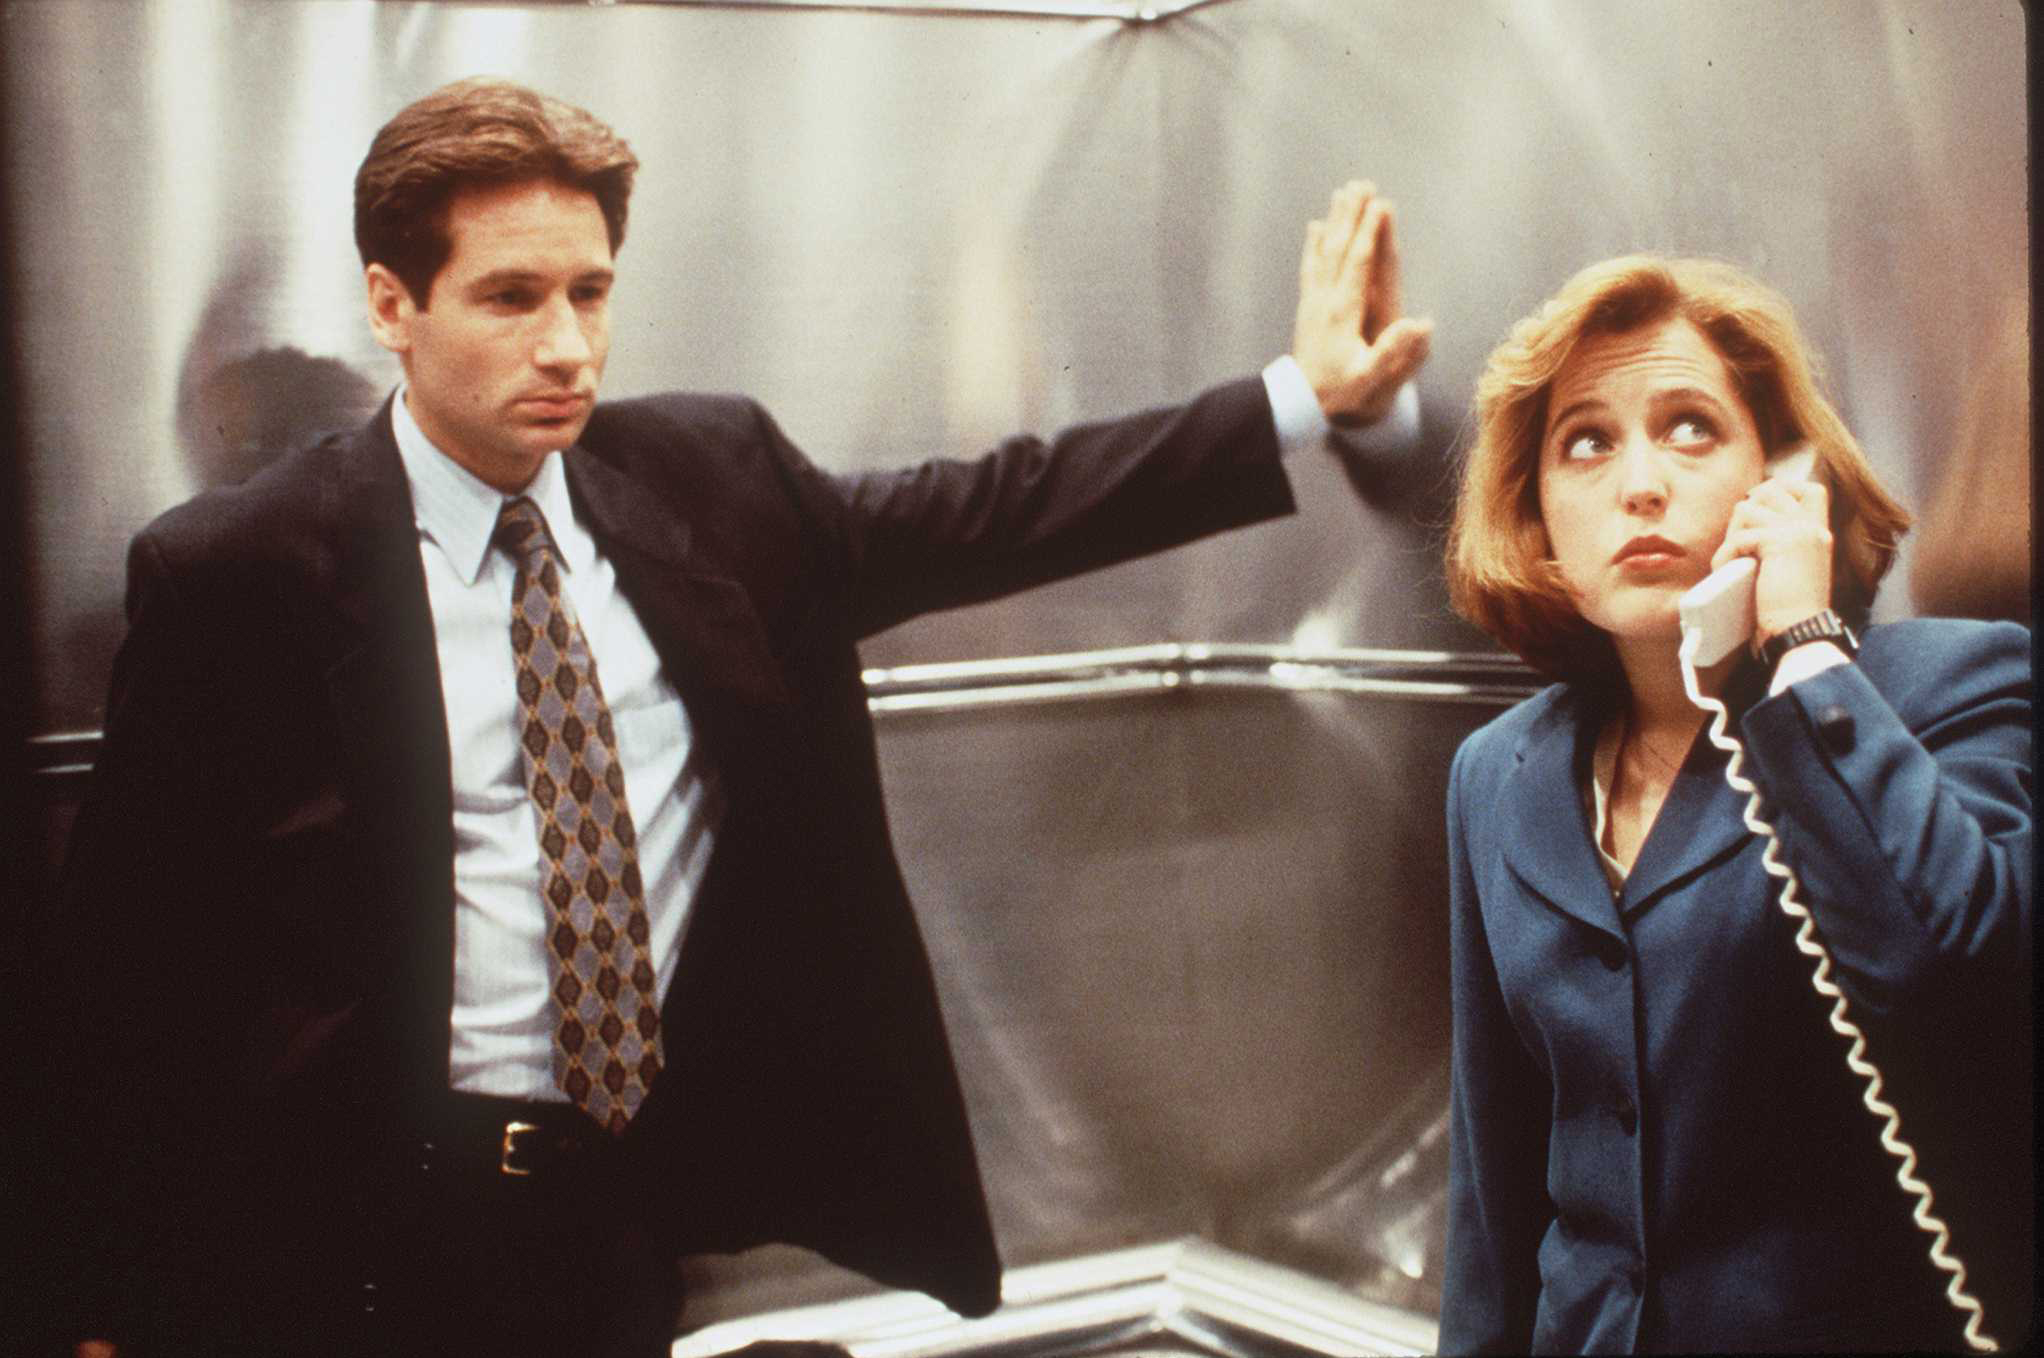 PHOTO: David Duchovny and Gillian Anderson in a scene from the show X-Files.